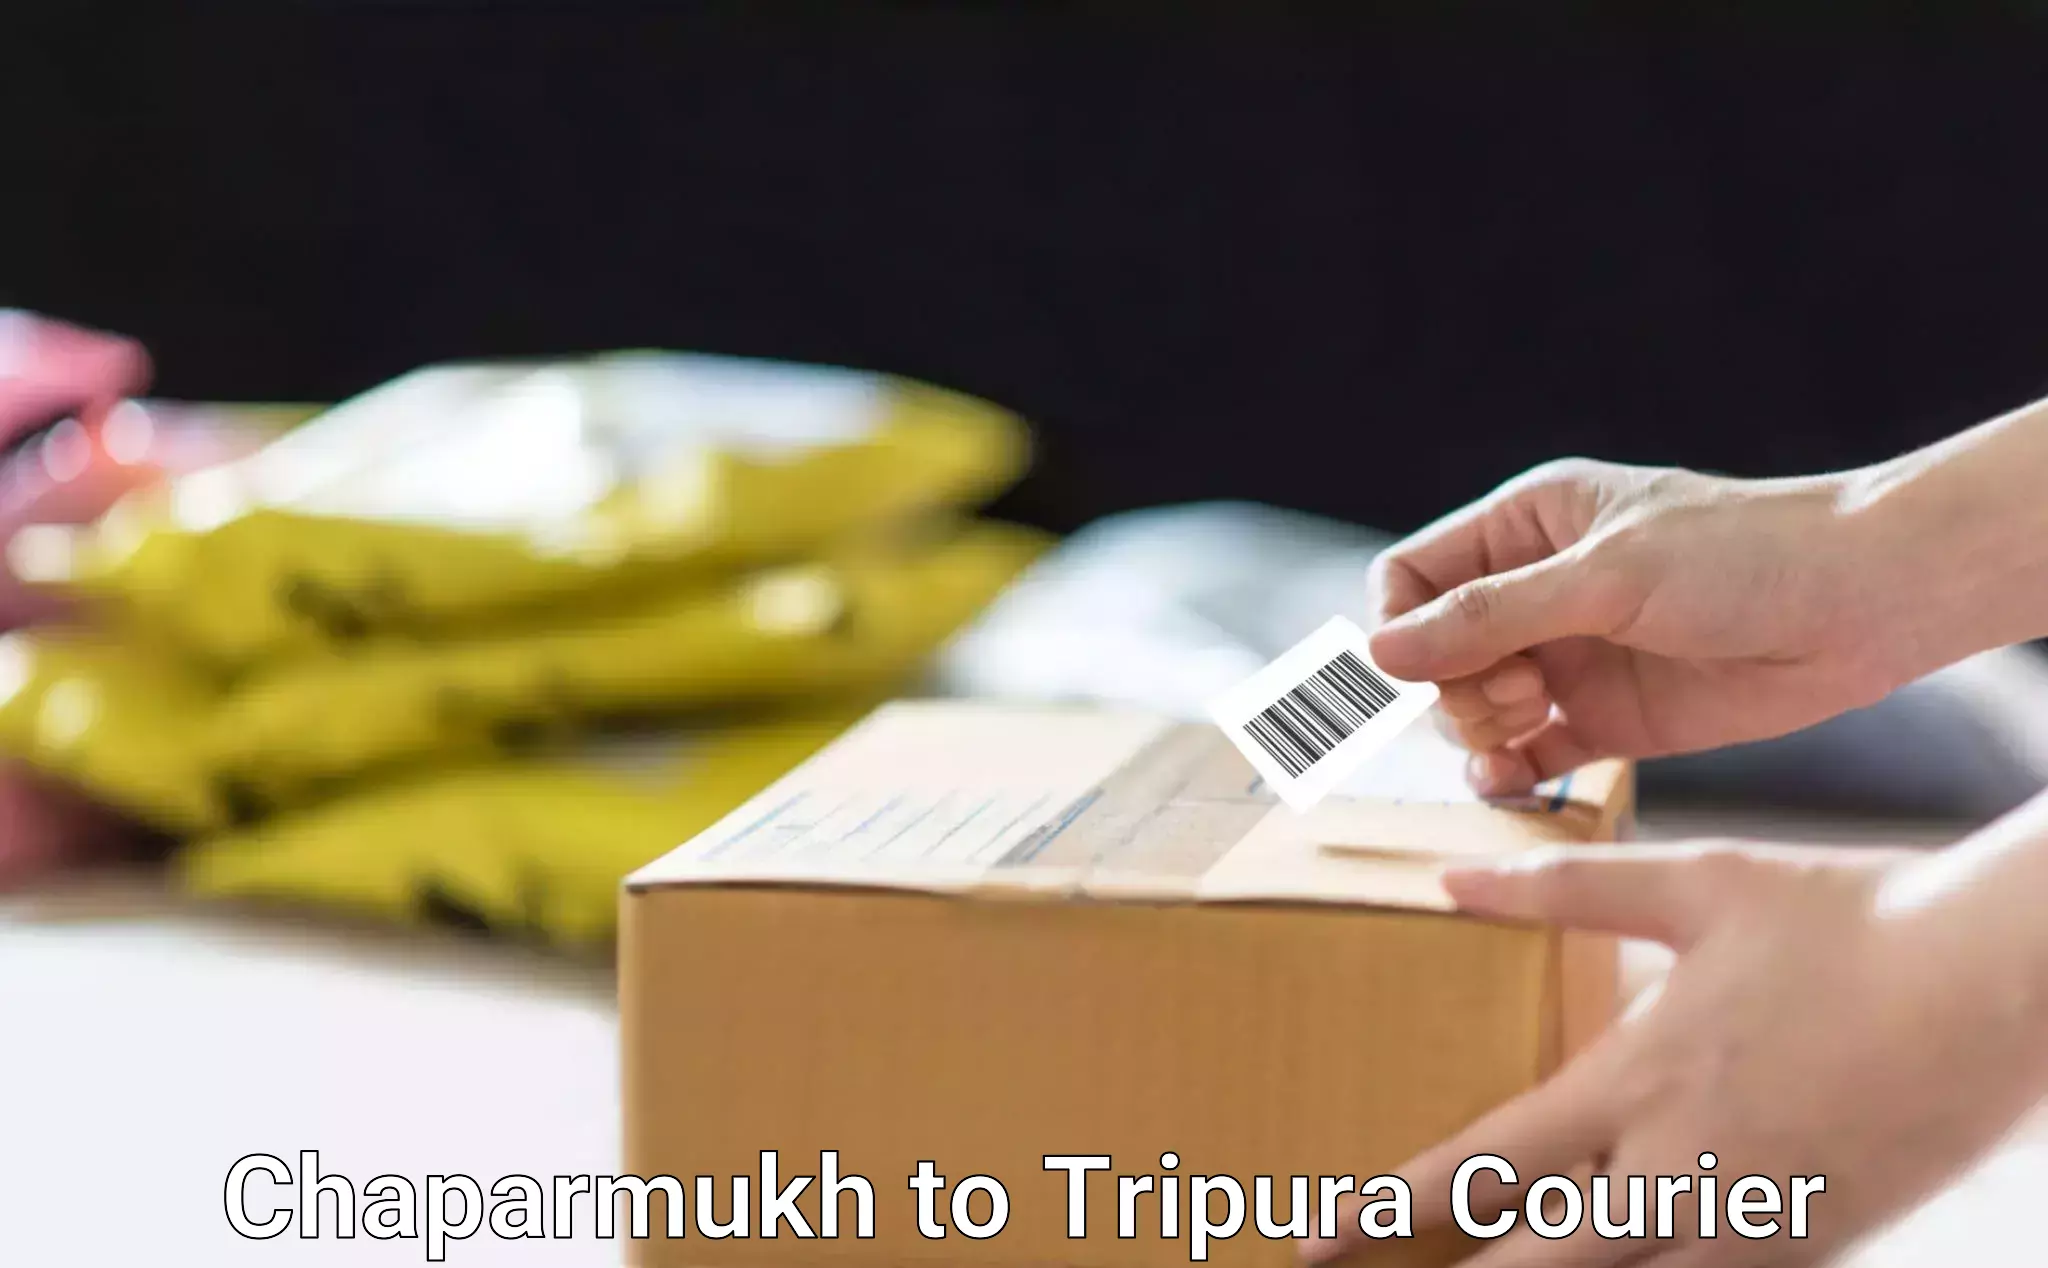 Multi-city courier Chaparmukh to Tripura